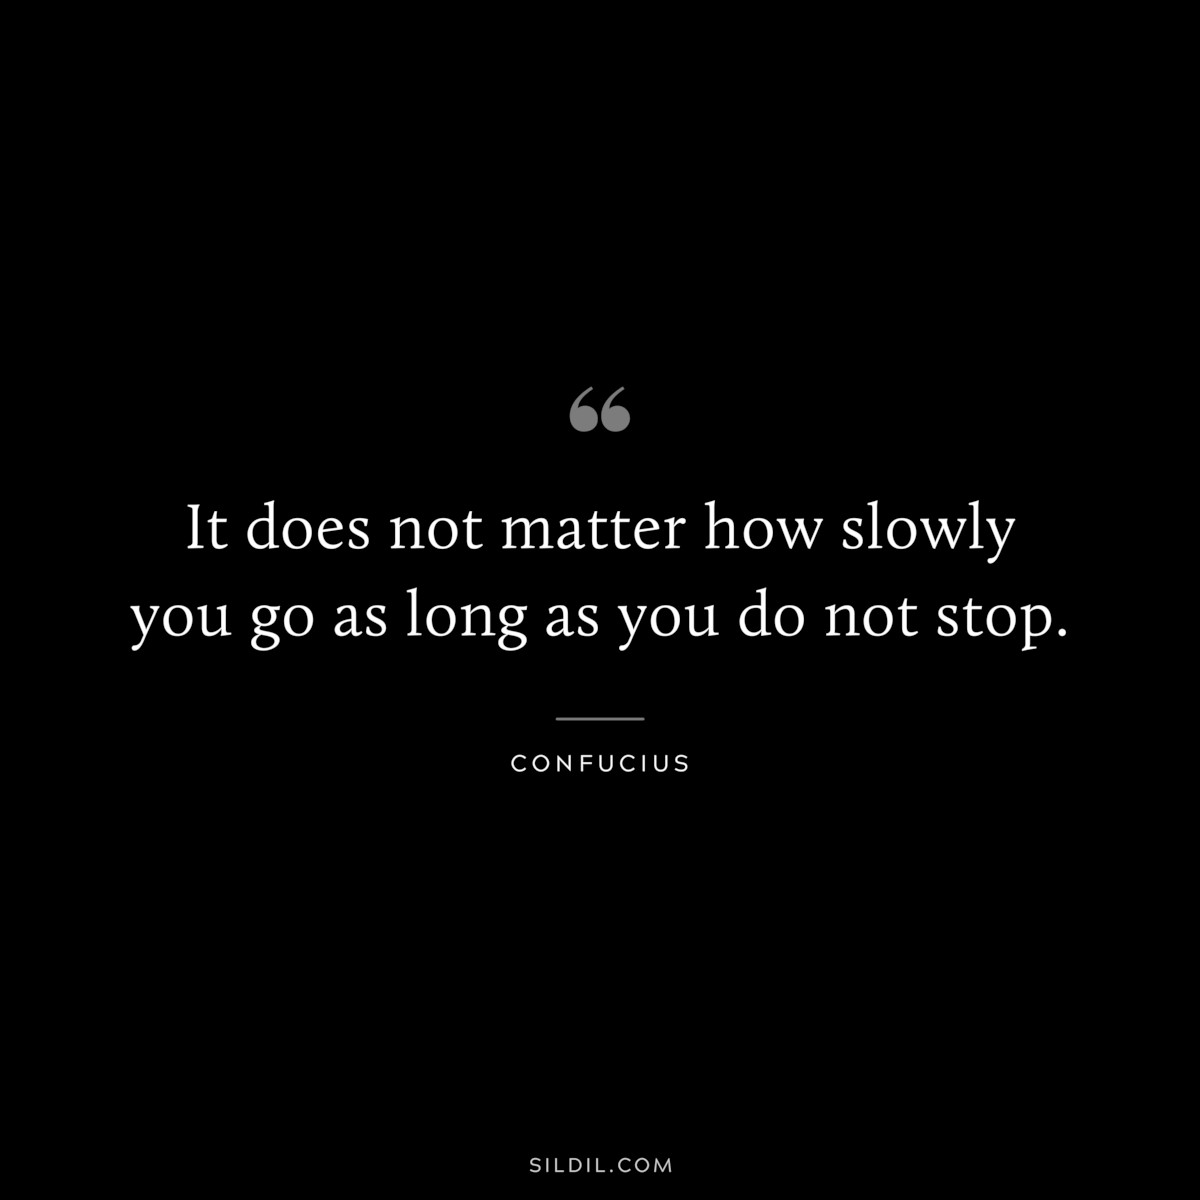 It does not matter how slowly you go as long as you do not stop. ― Confucius